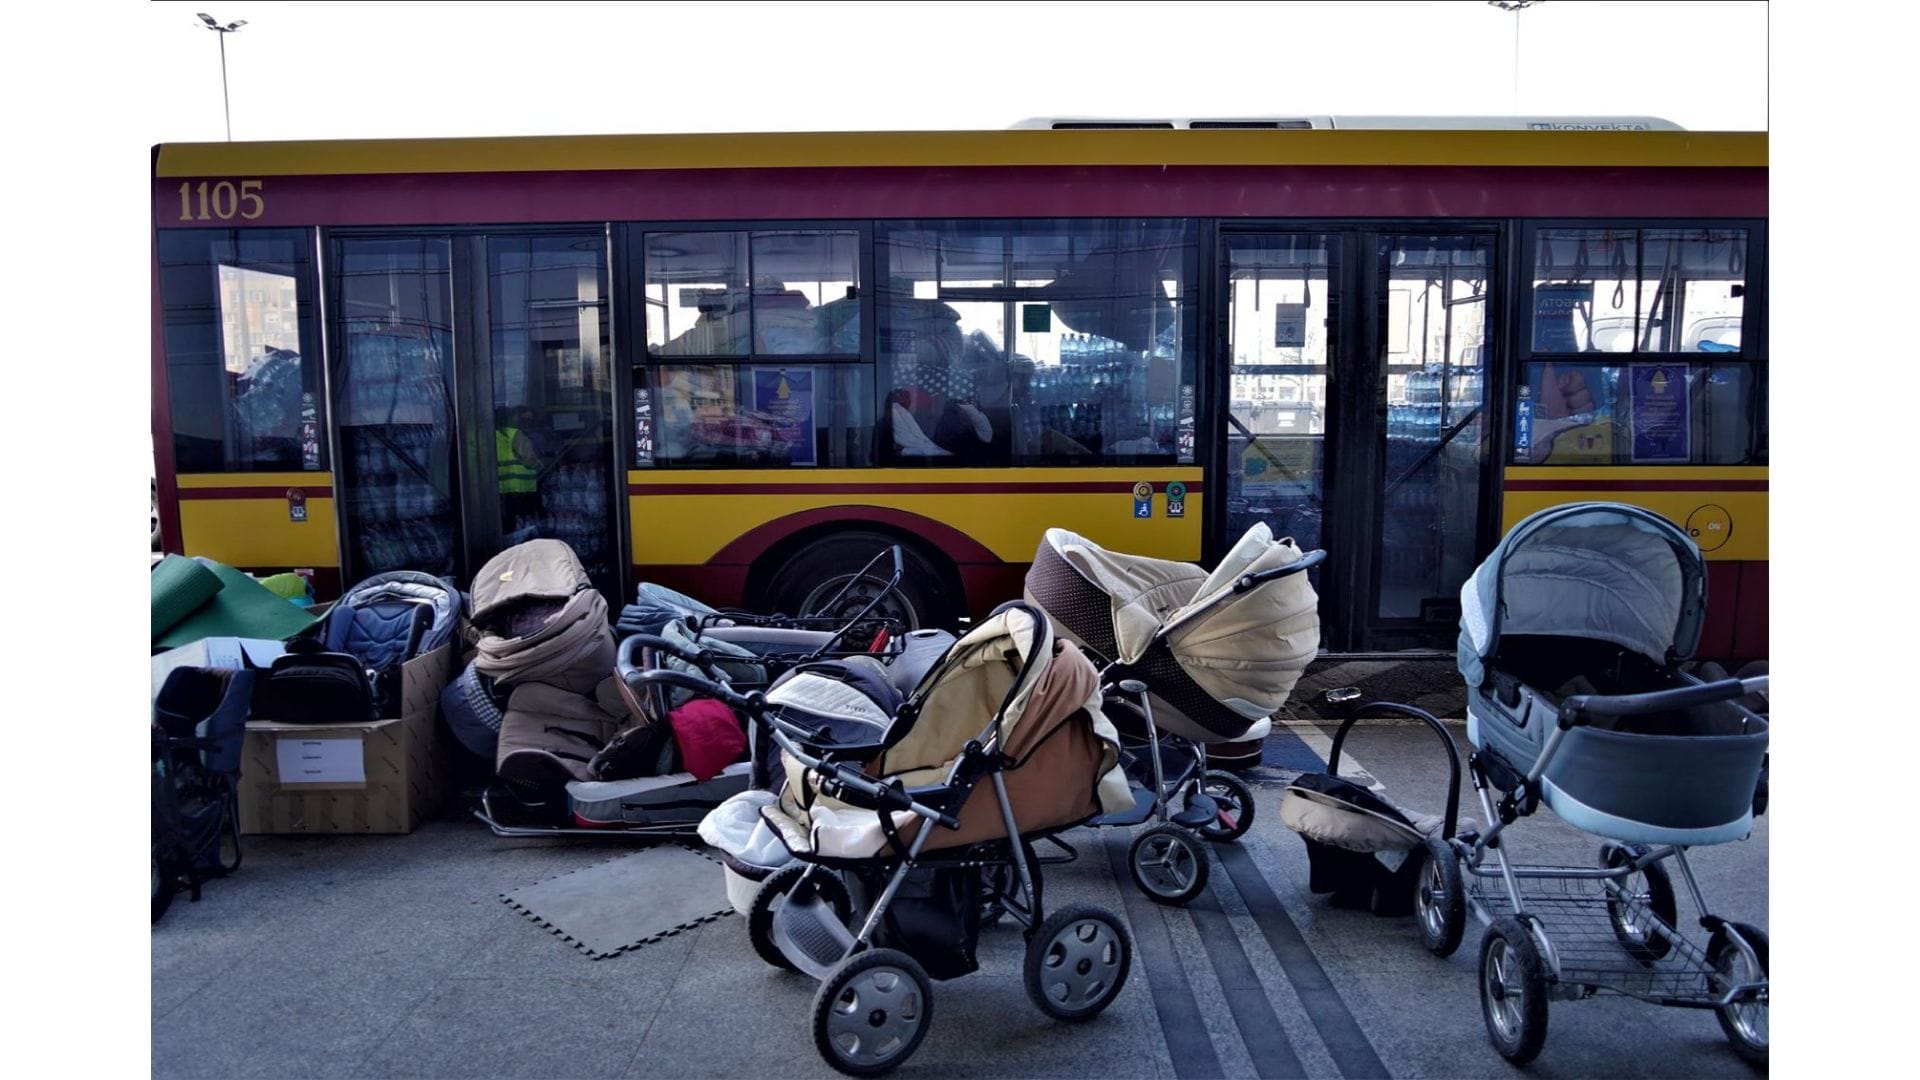 Several strollers beside a bus.